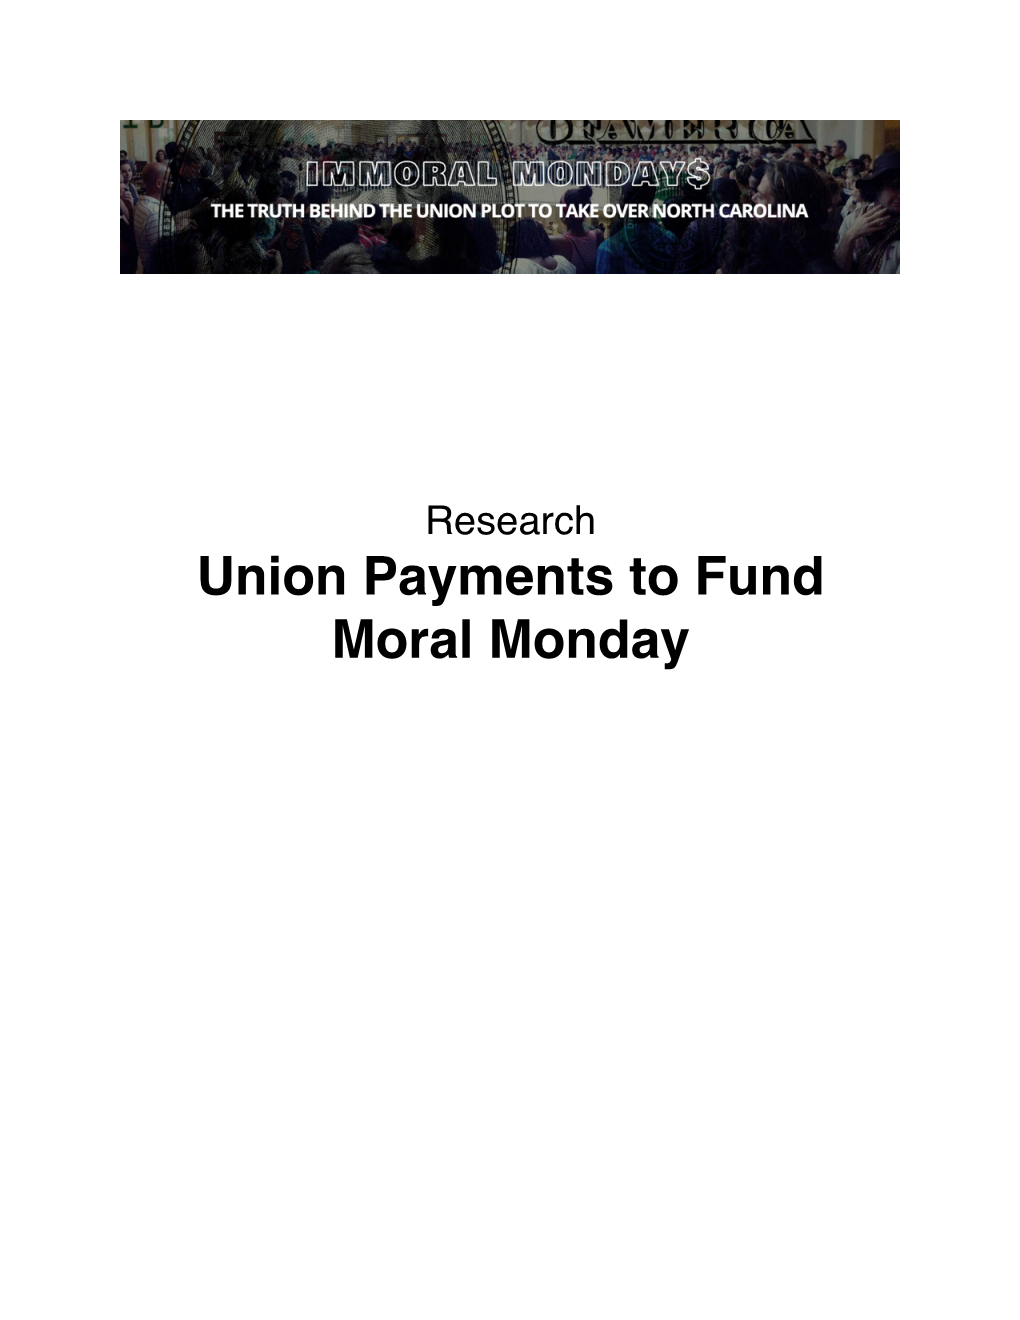 Union Payments to Fund Moral Monday Background